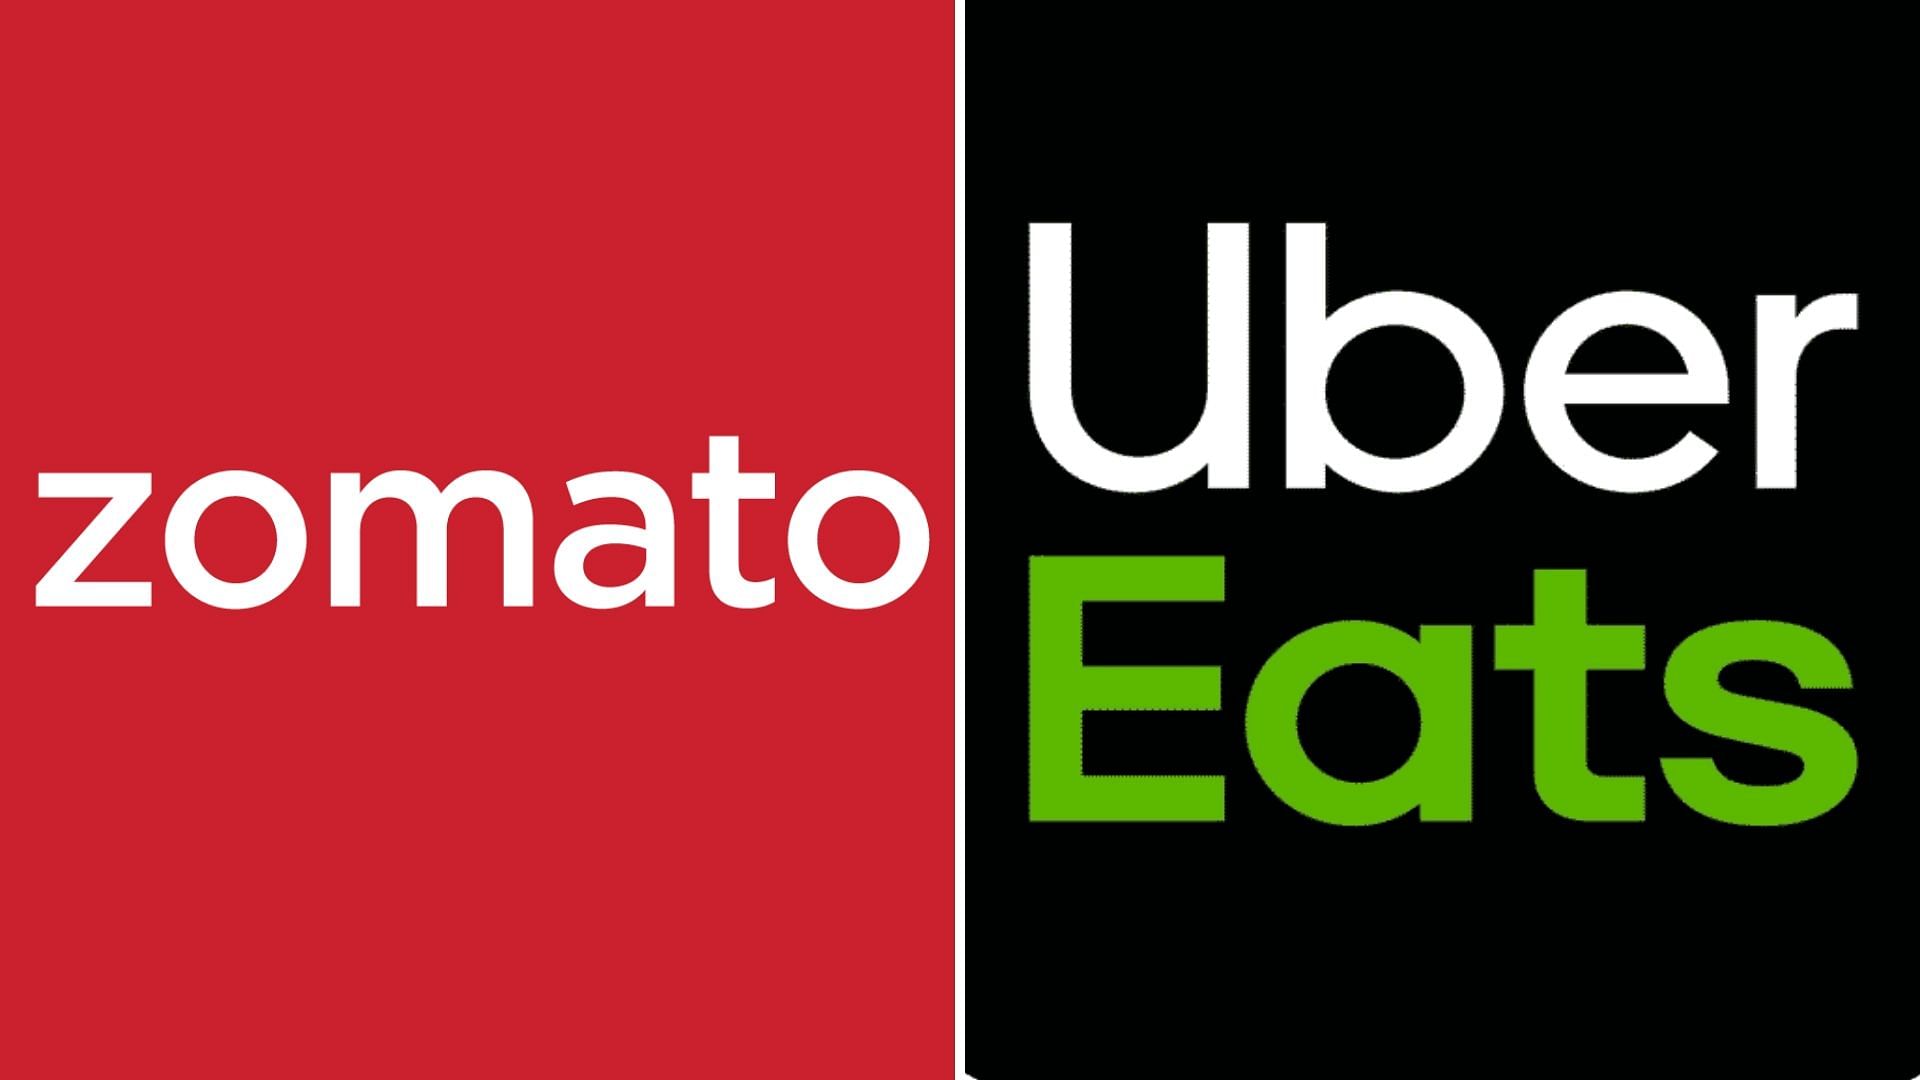 Zomato is the latest food delivery giant to show interest in buying the company.